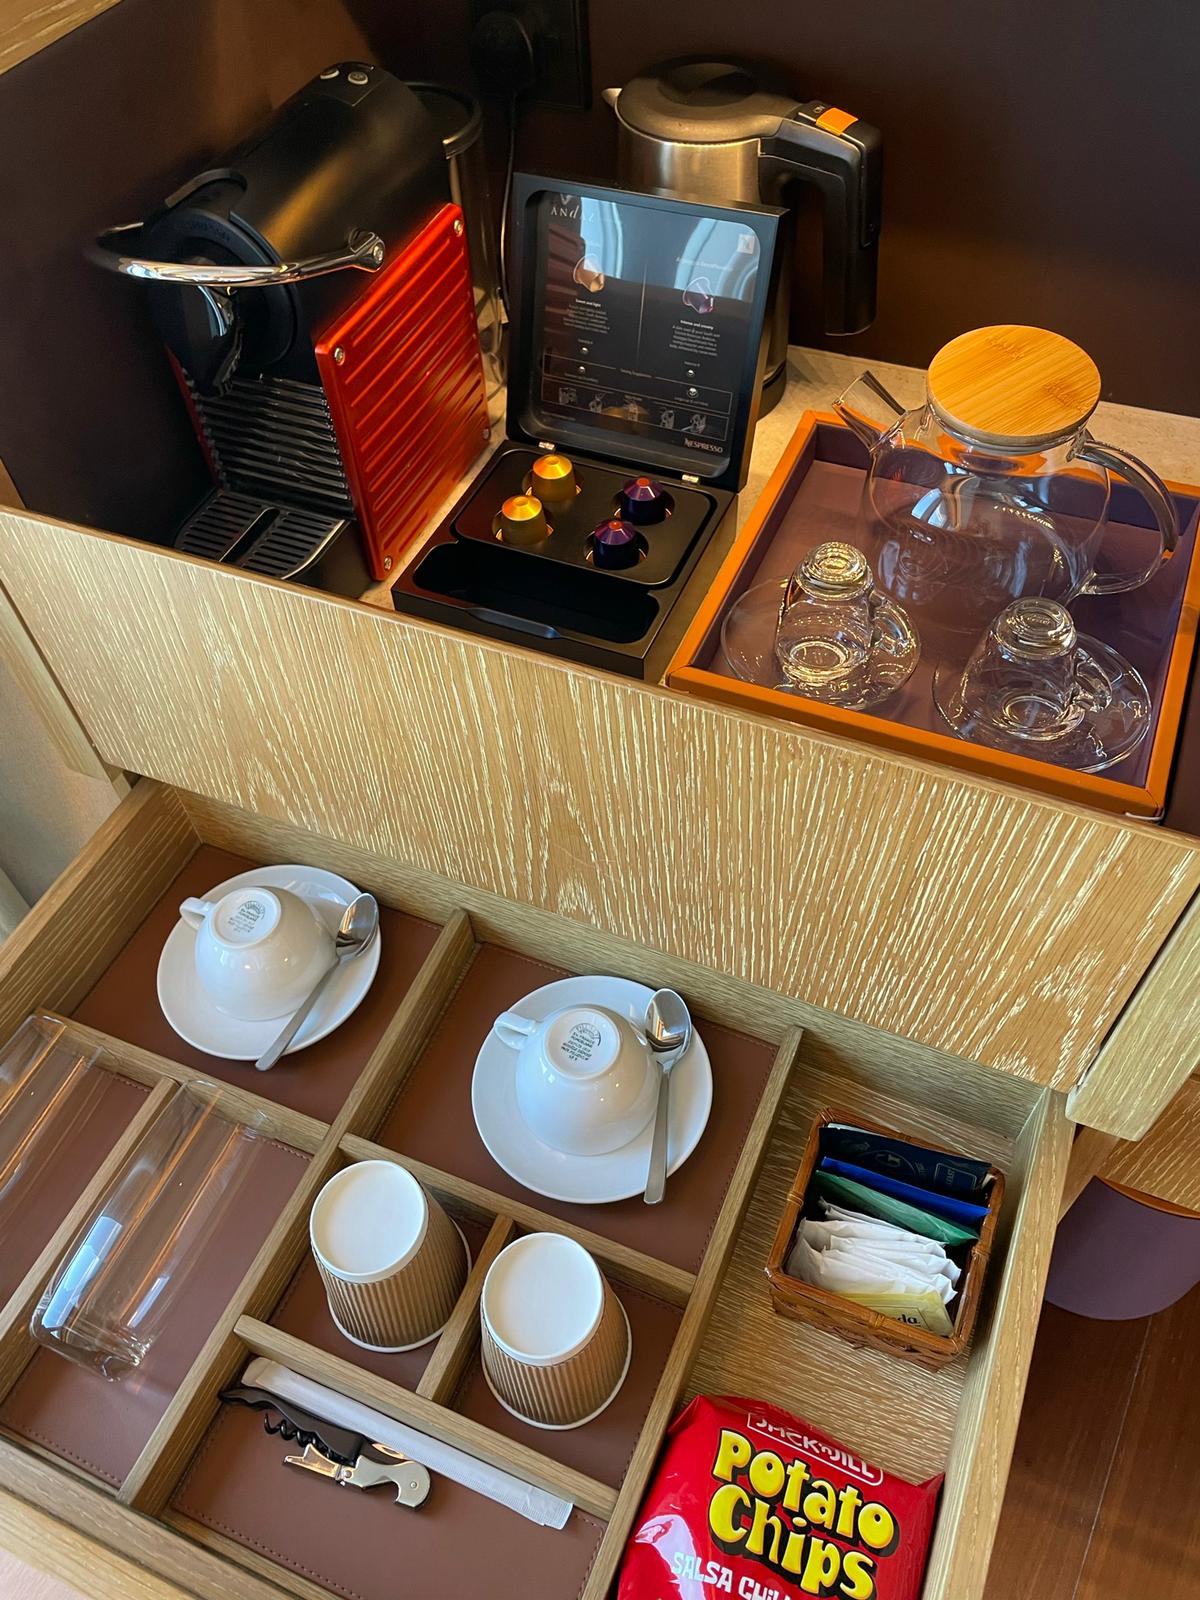 Room amenities at Andaz Singapore